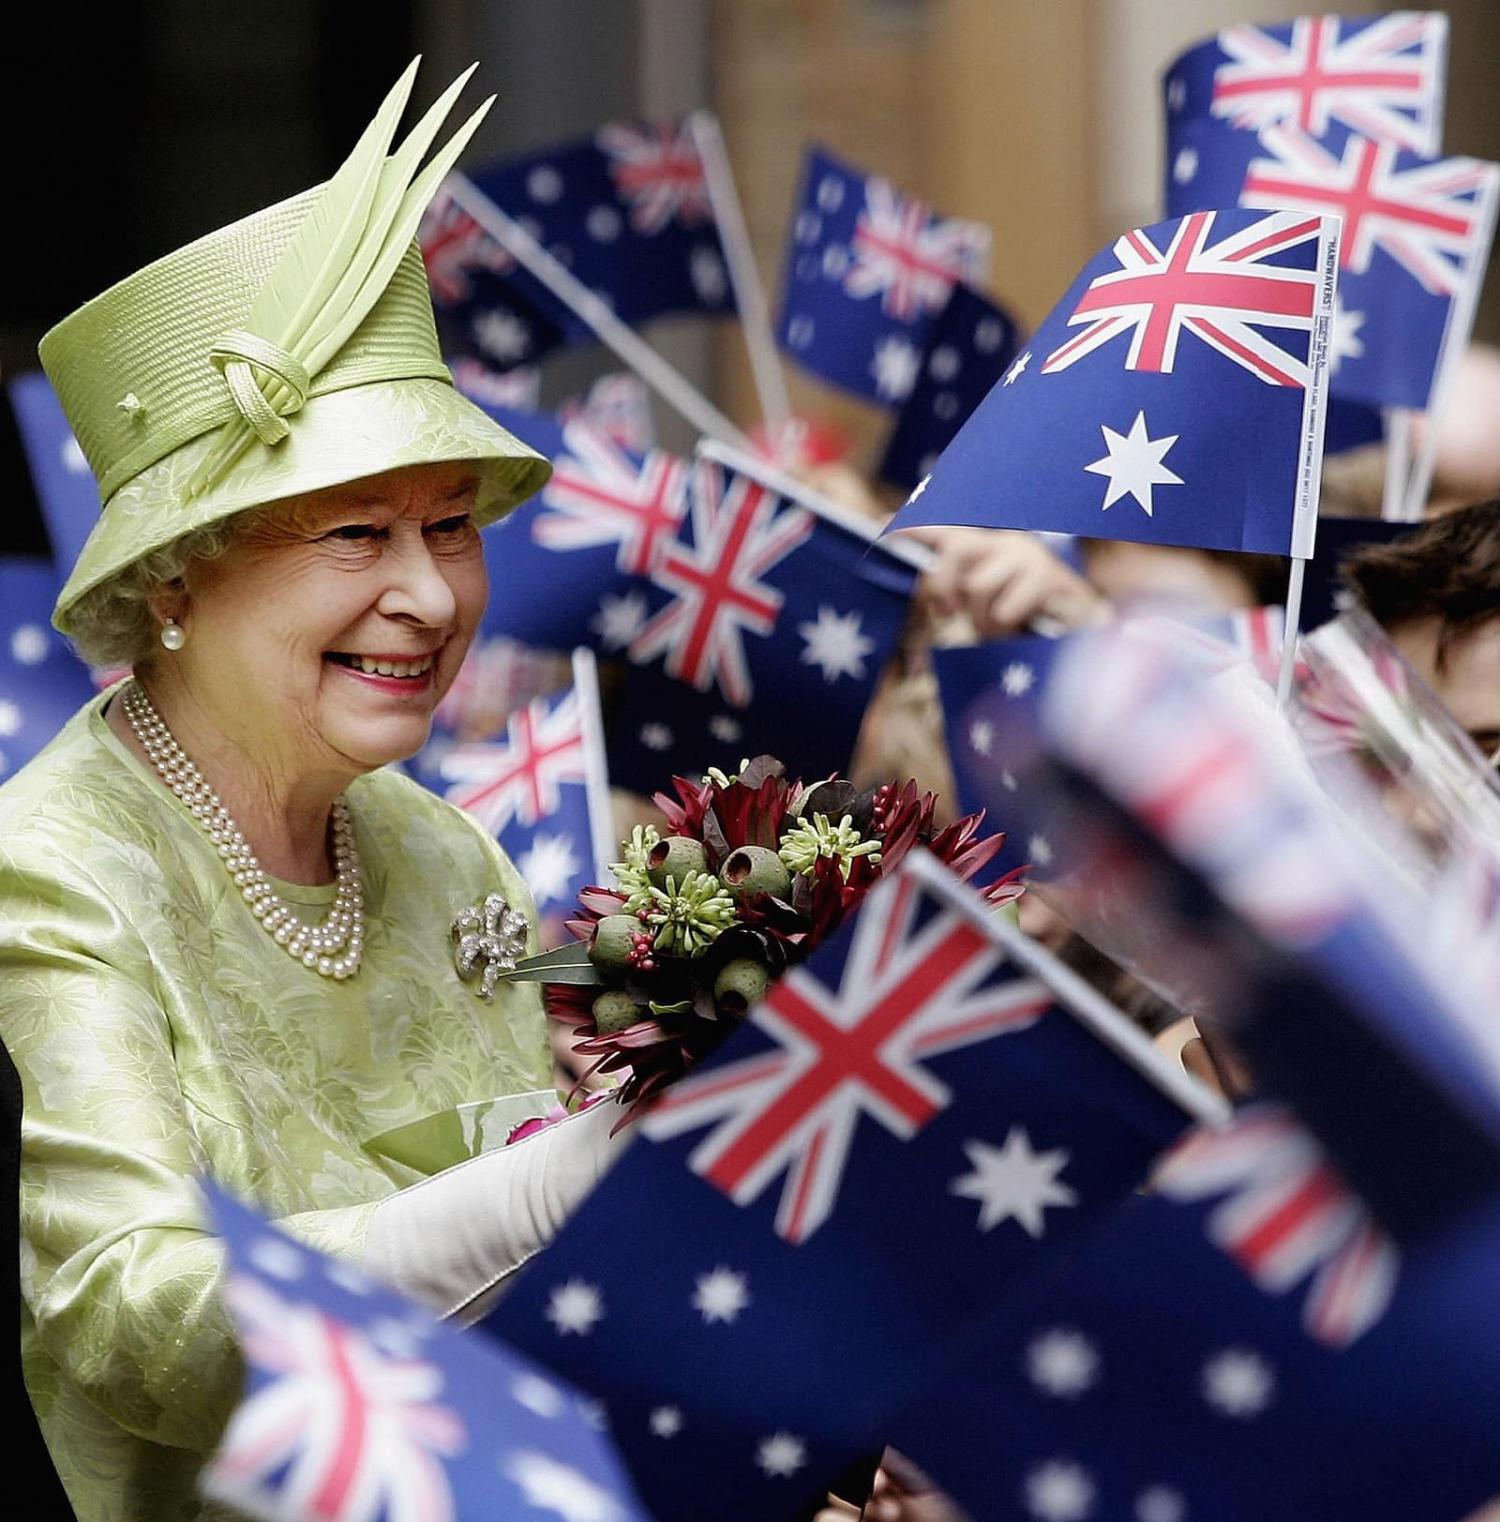 Under Australia’s status as a constitutional monarchy, Elizabeth II is Queen of Australia (Rob Griffith/Pool/Getty Images)